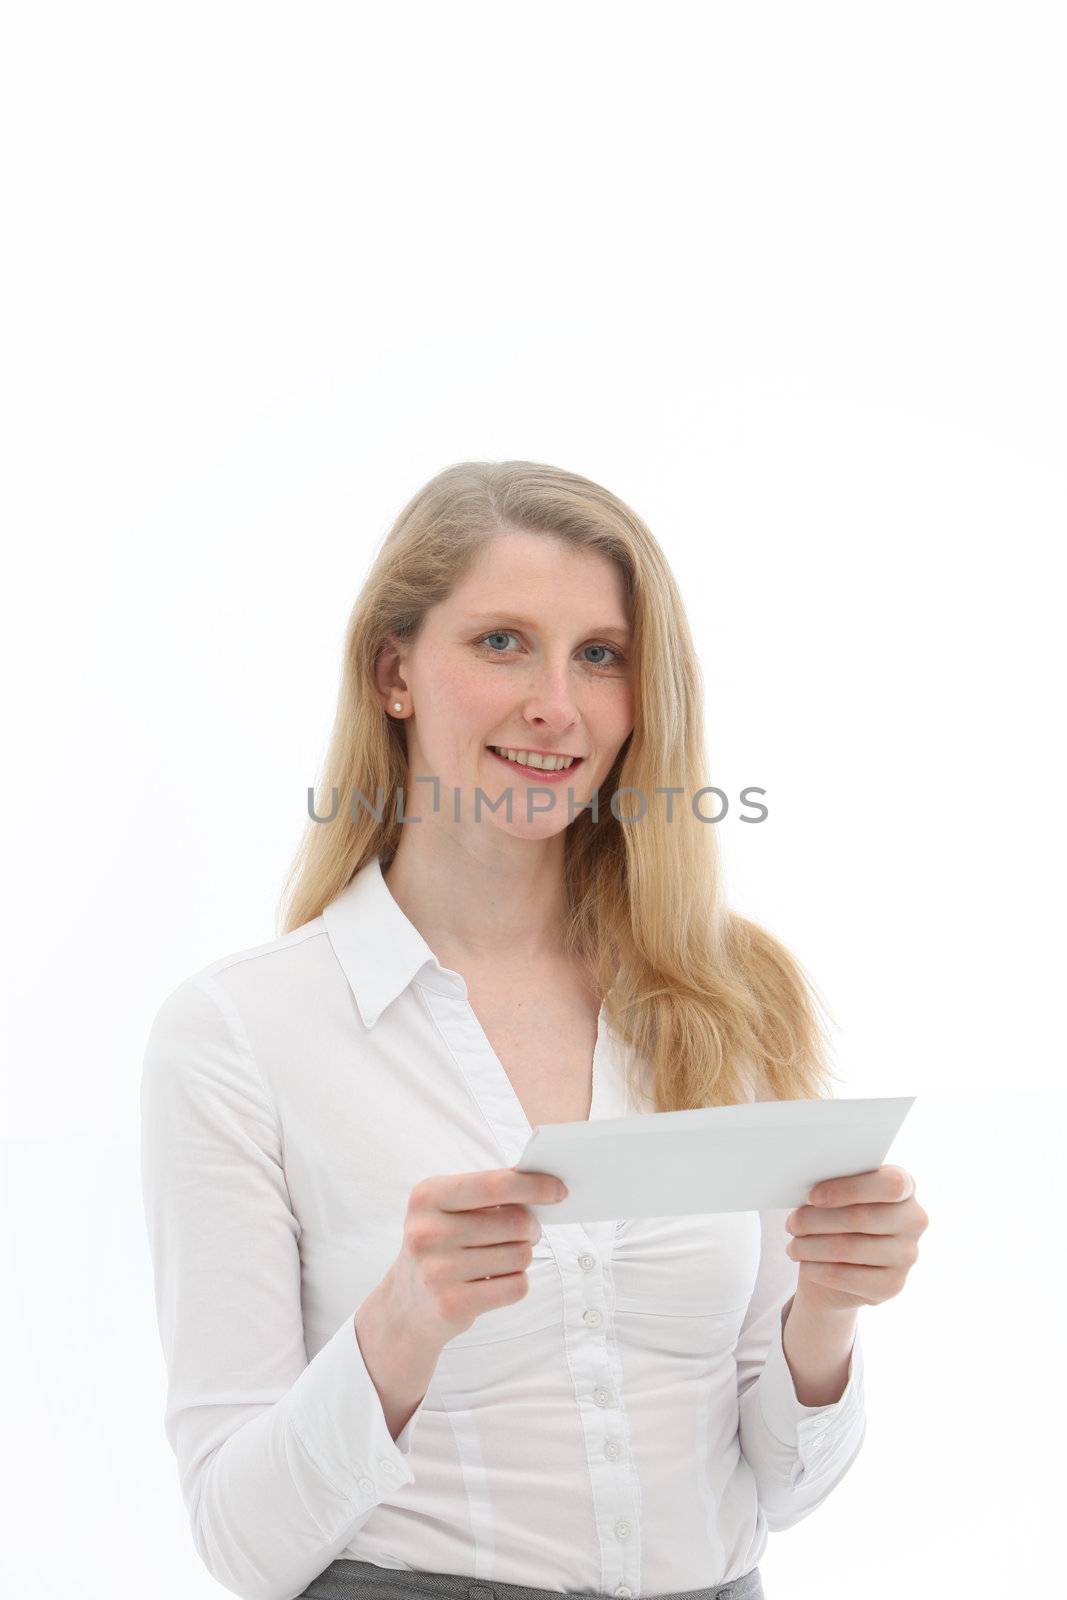 Attractive blonde woman smiling in anticipation at the thought of reading a letter which she is holding in her hands isolated on white